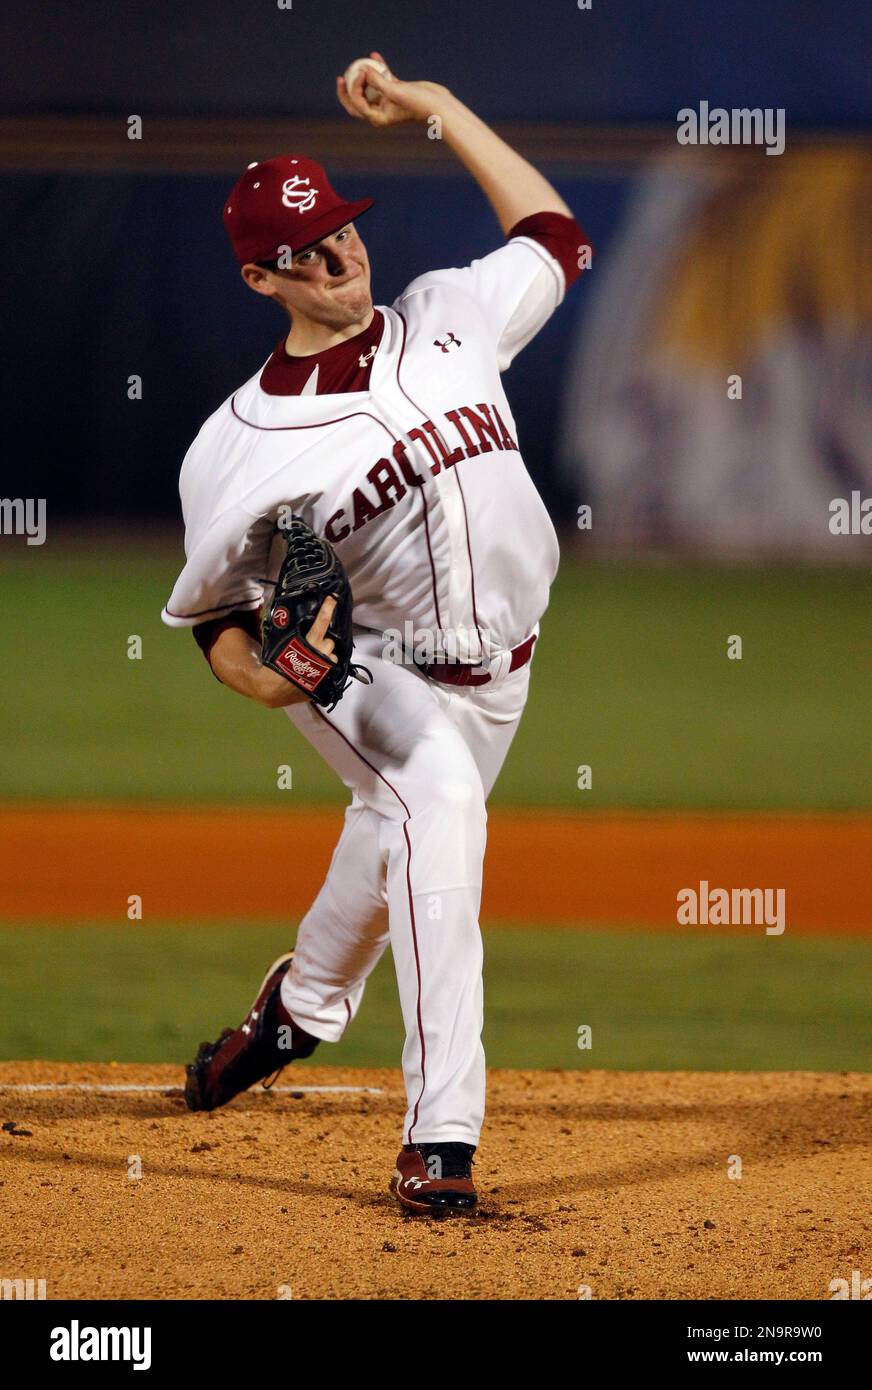 South Carolina's Jordan Montgomery pitches in the first inning of their  Southeastern Conference Tournament baseball game against Vanderbilt at the  Hoover Met in Hoover, Ala., Thursday, May 23, 2013. (AP Photo/Dave Martin